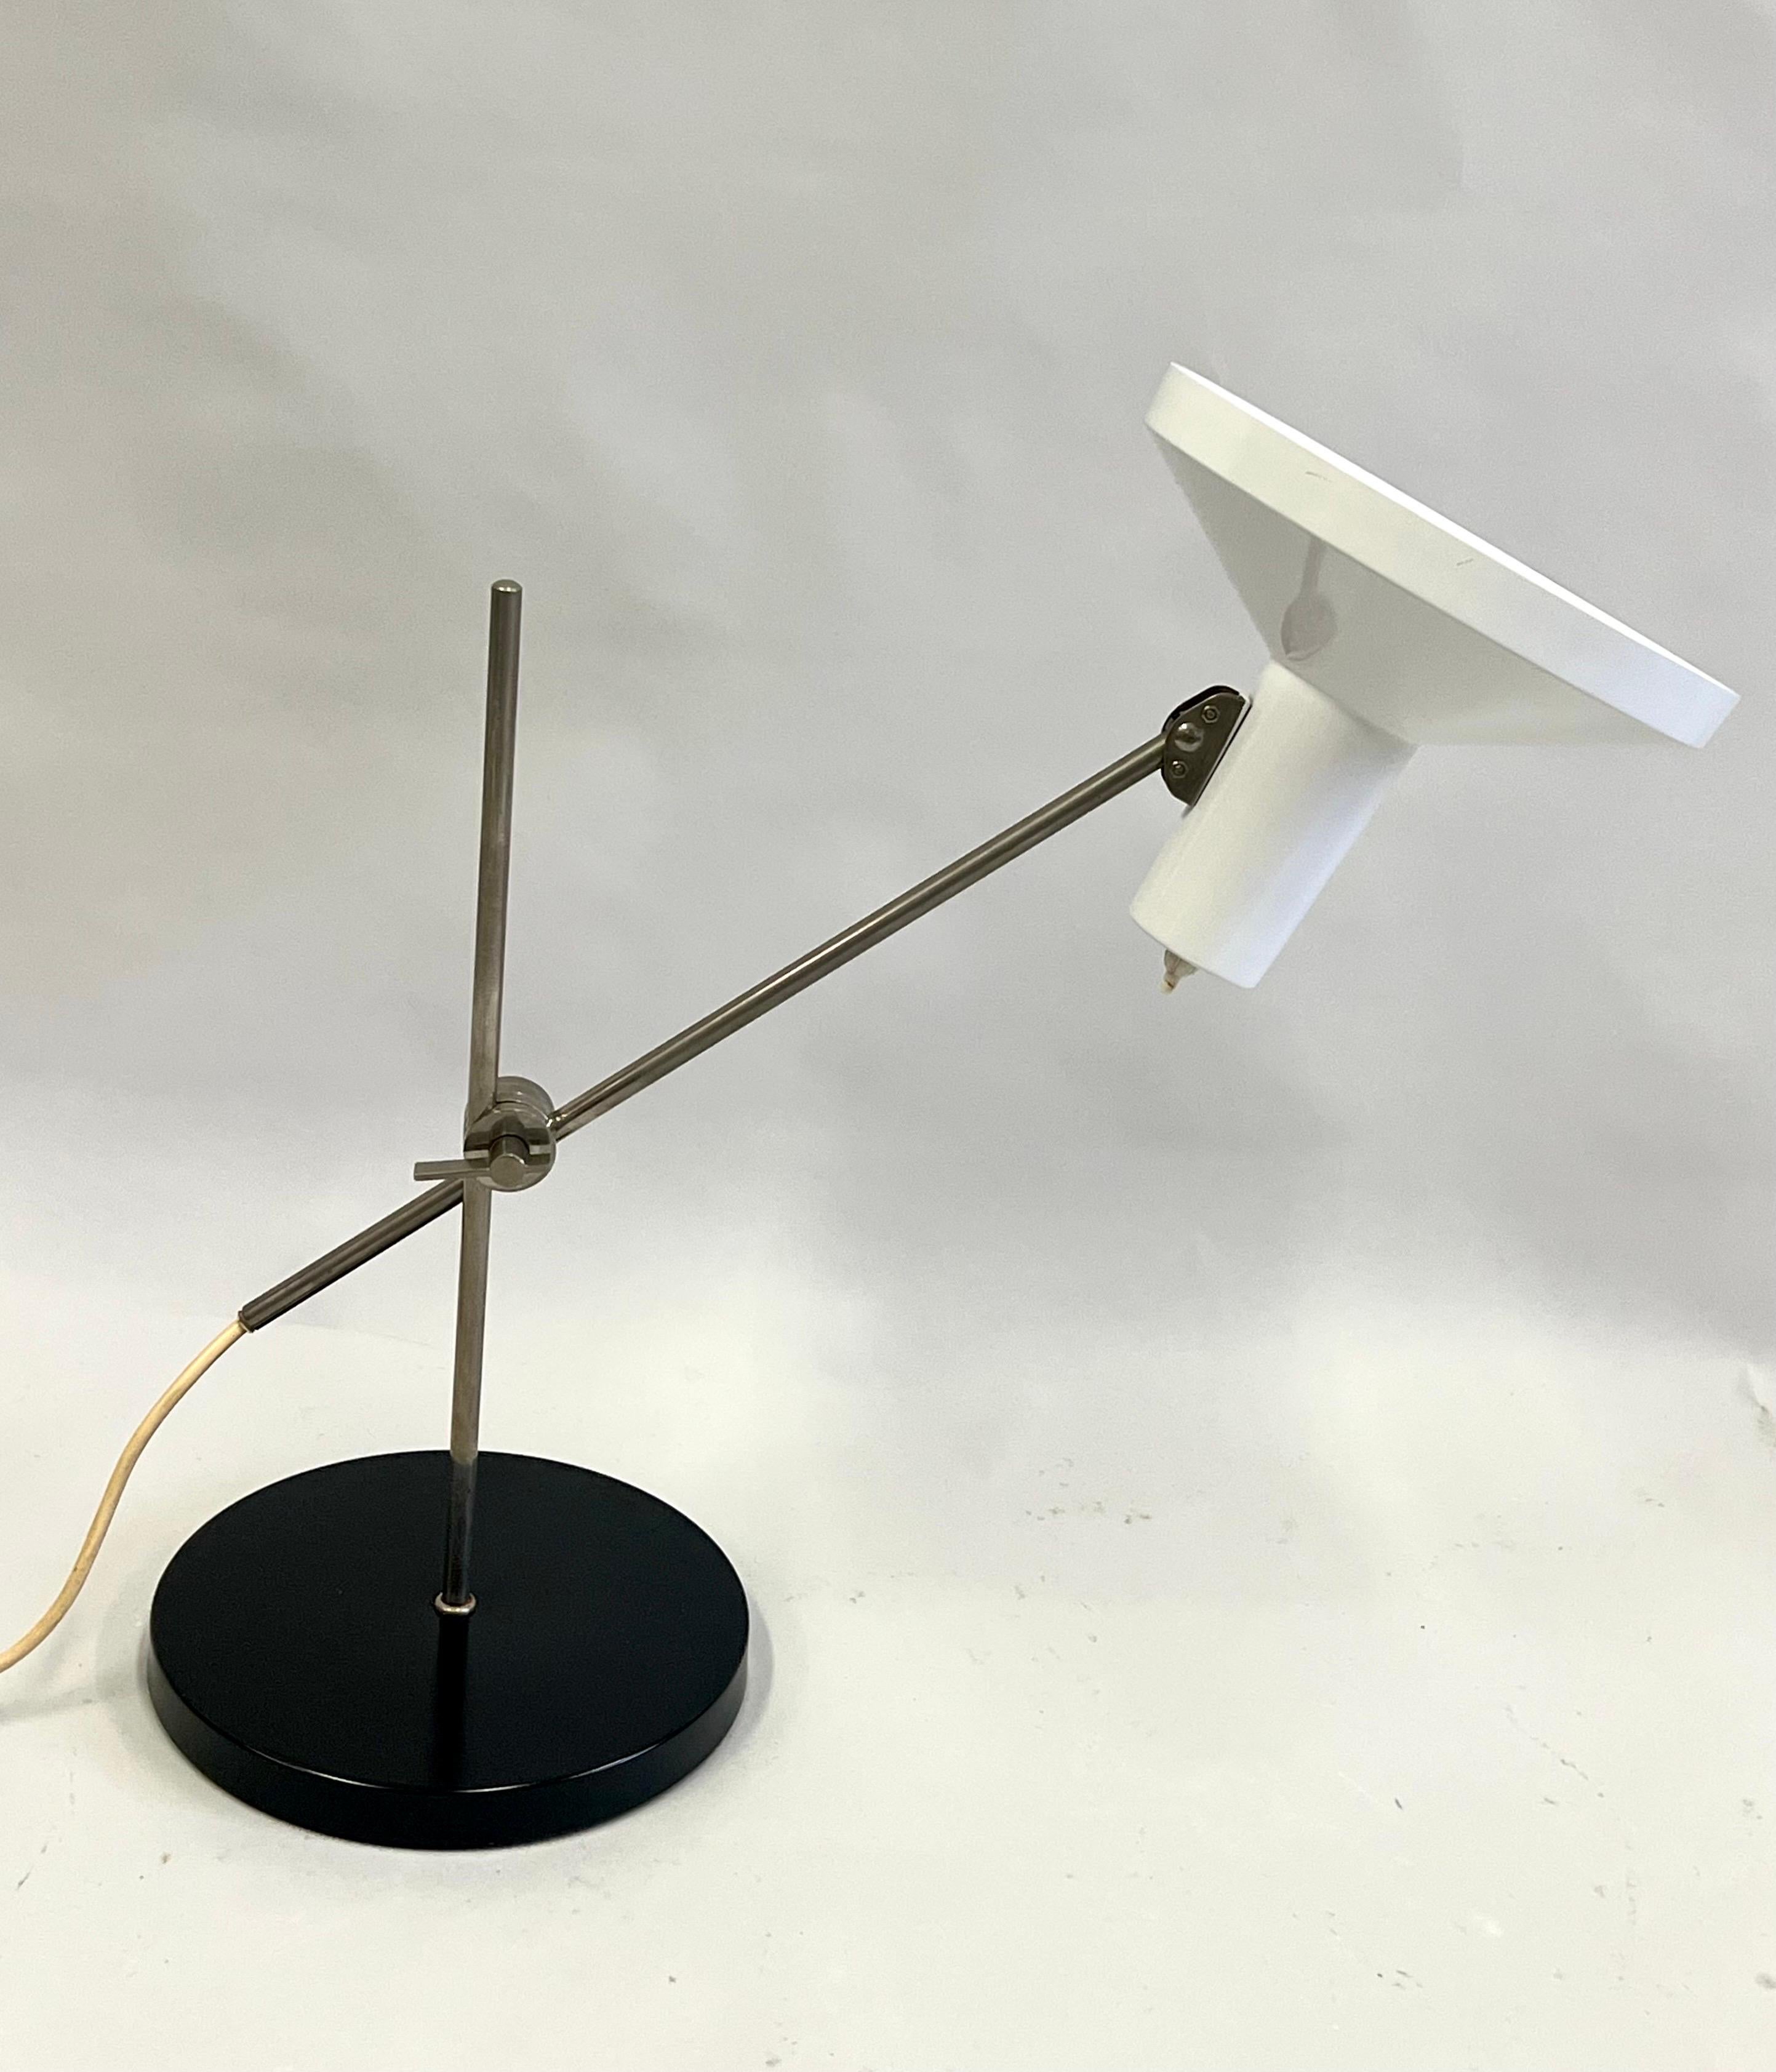 An original, daring Italian Mid-Century Modern table lamp circa 1950 attributed to Arredoluce and Angelo Lelli. This elegant and rare piece displays the timeless aesthetics, balance and engineering that Italian Design is known for. A minimalist